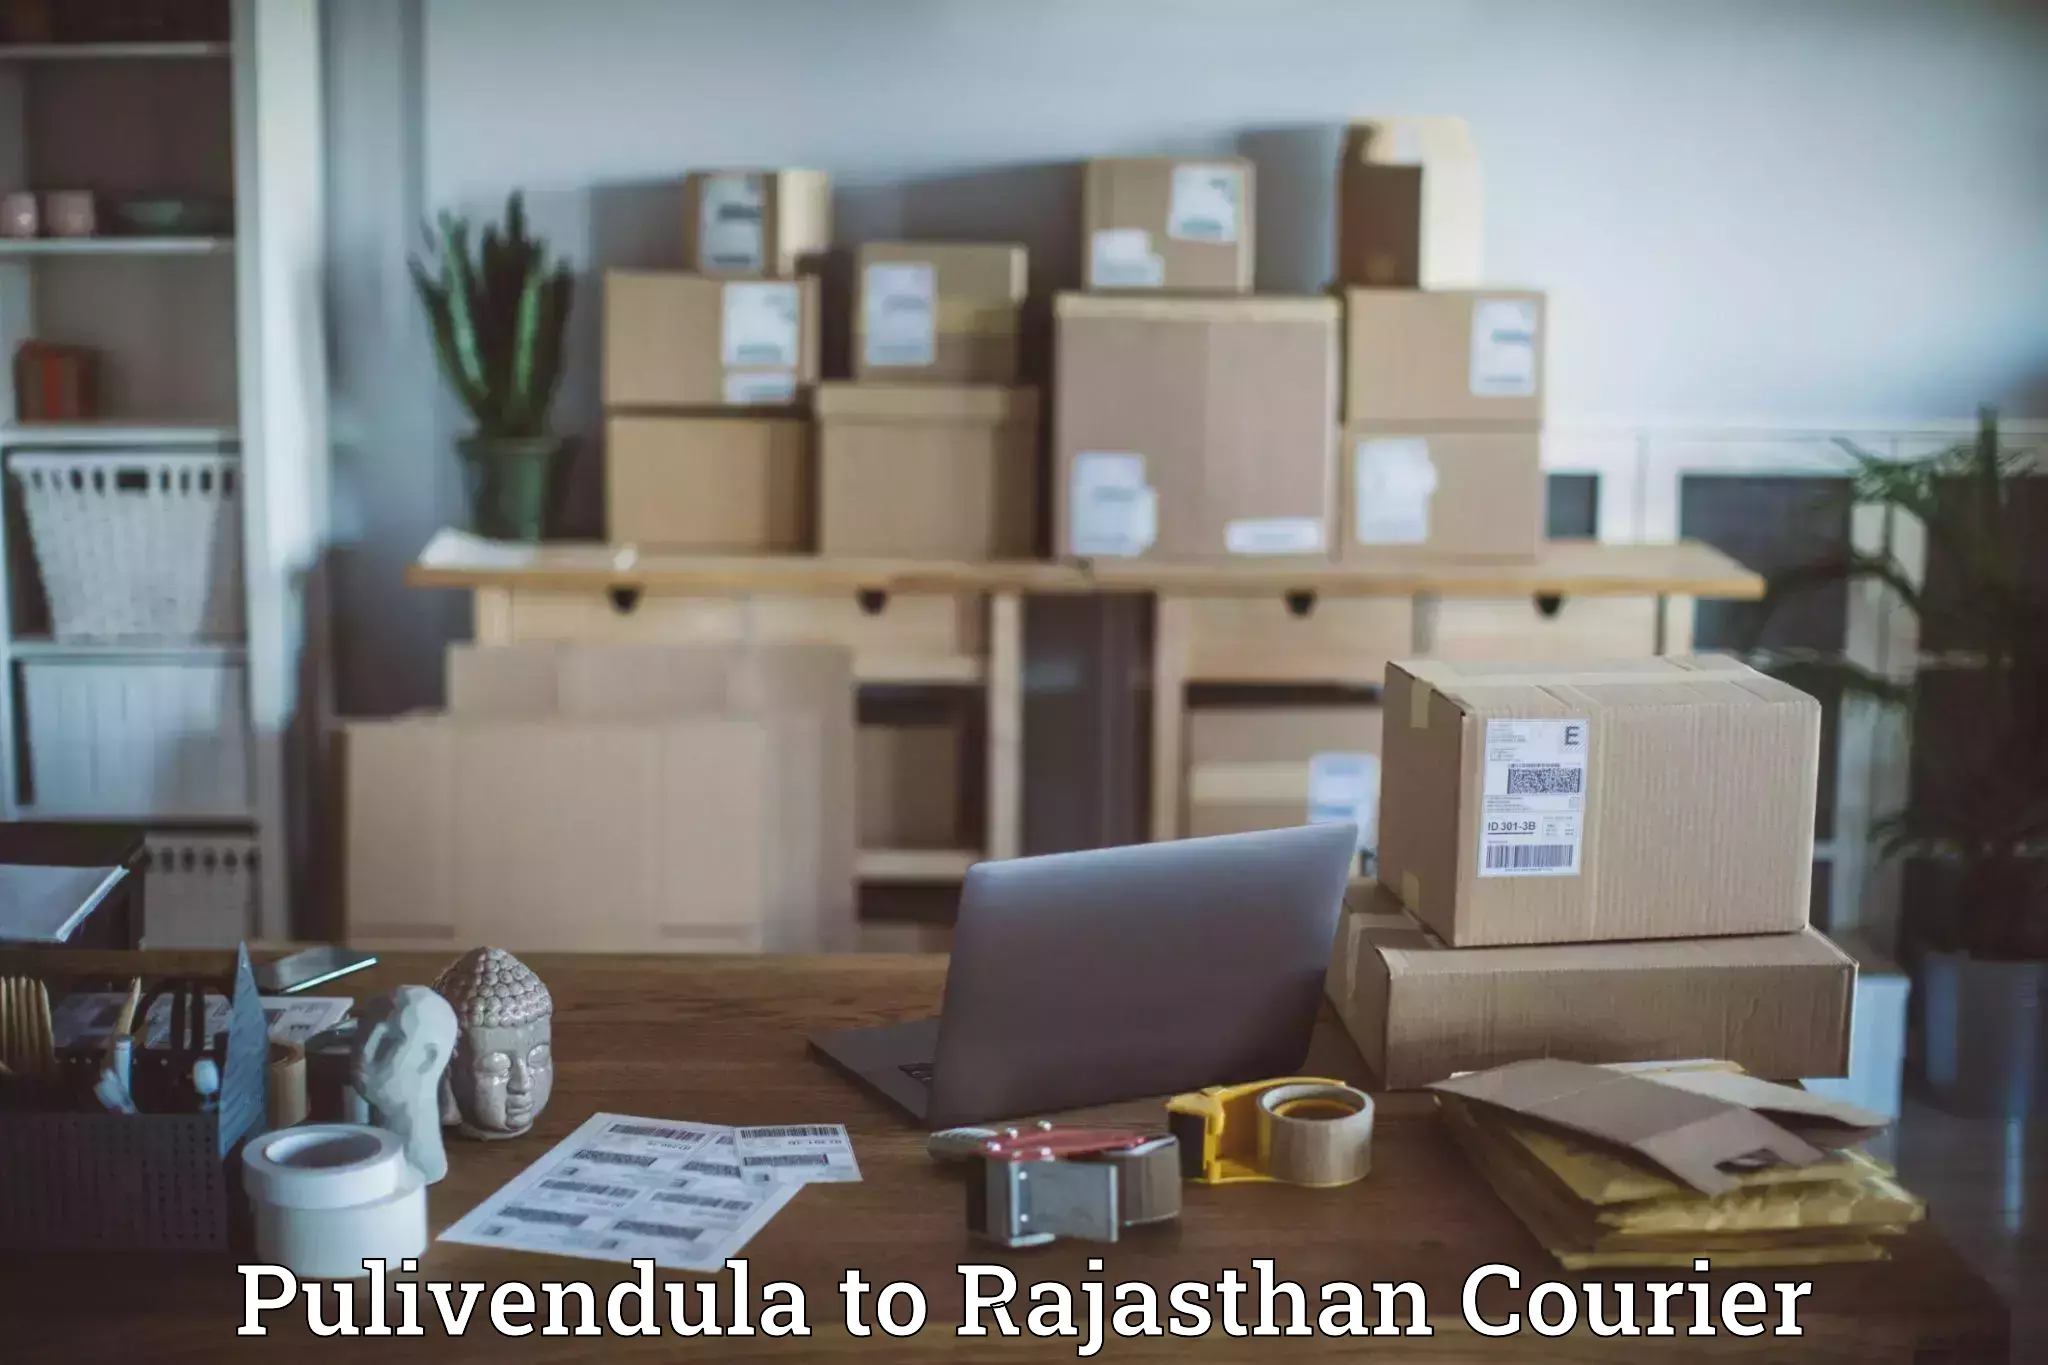 Courier service partnerships Pulivendula to Rajasthan